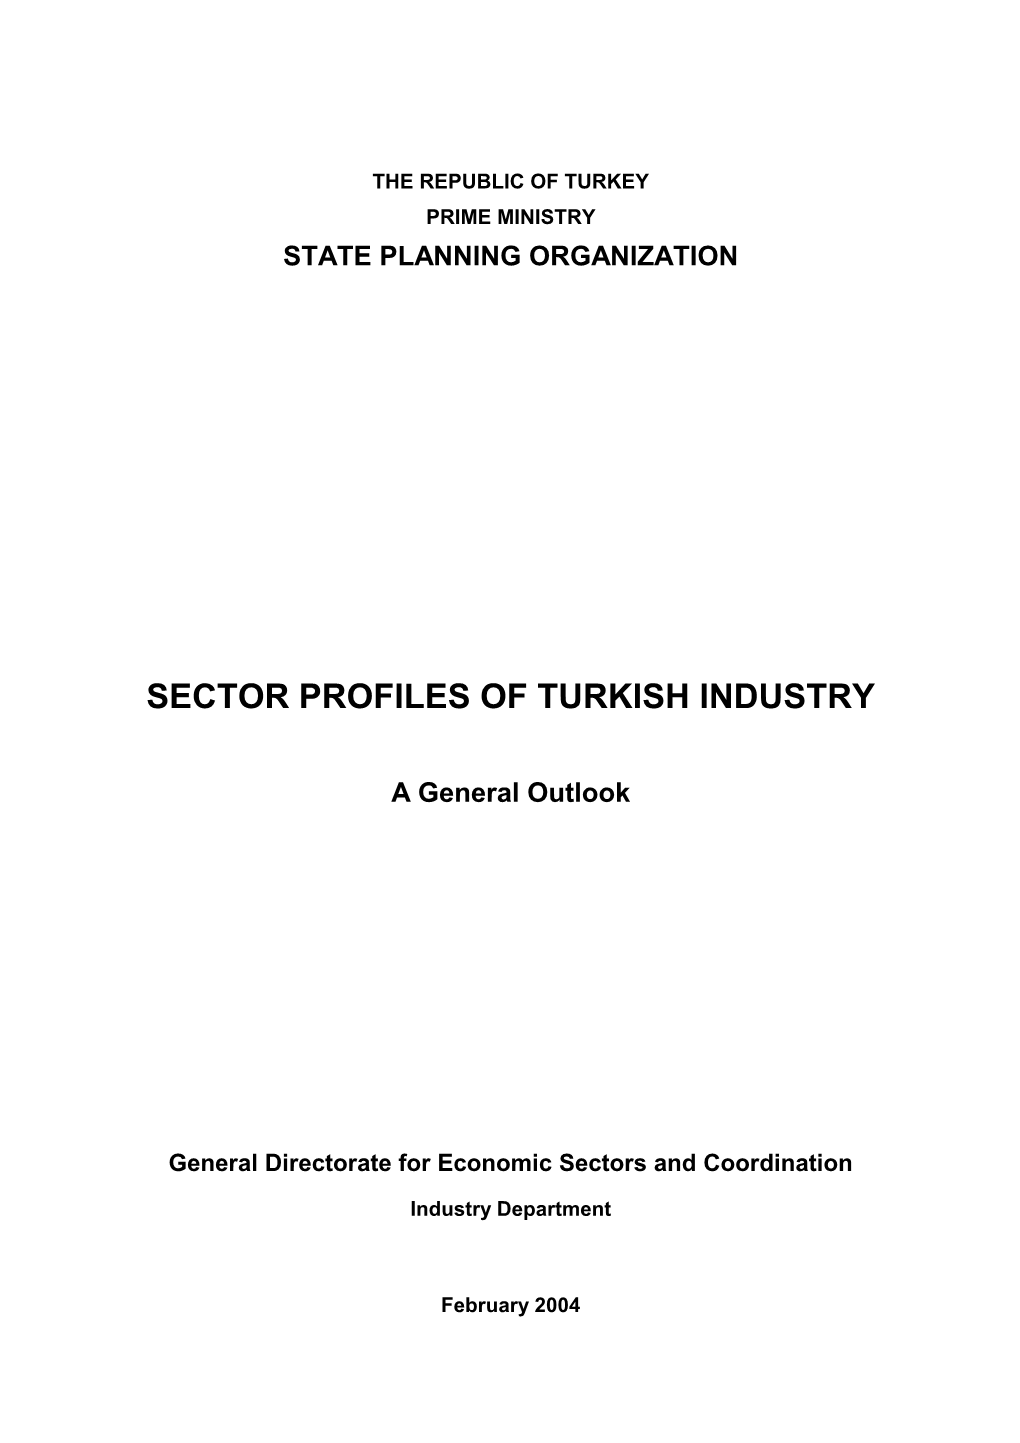 Sector Profiles of Turkish Industry